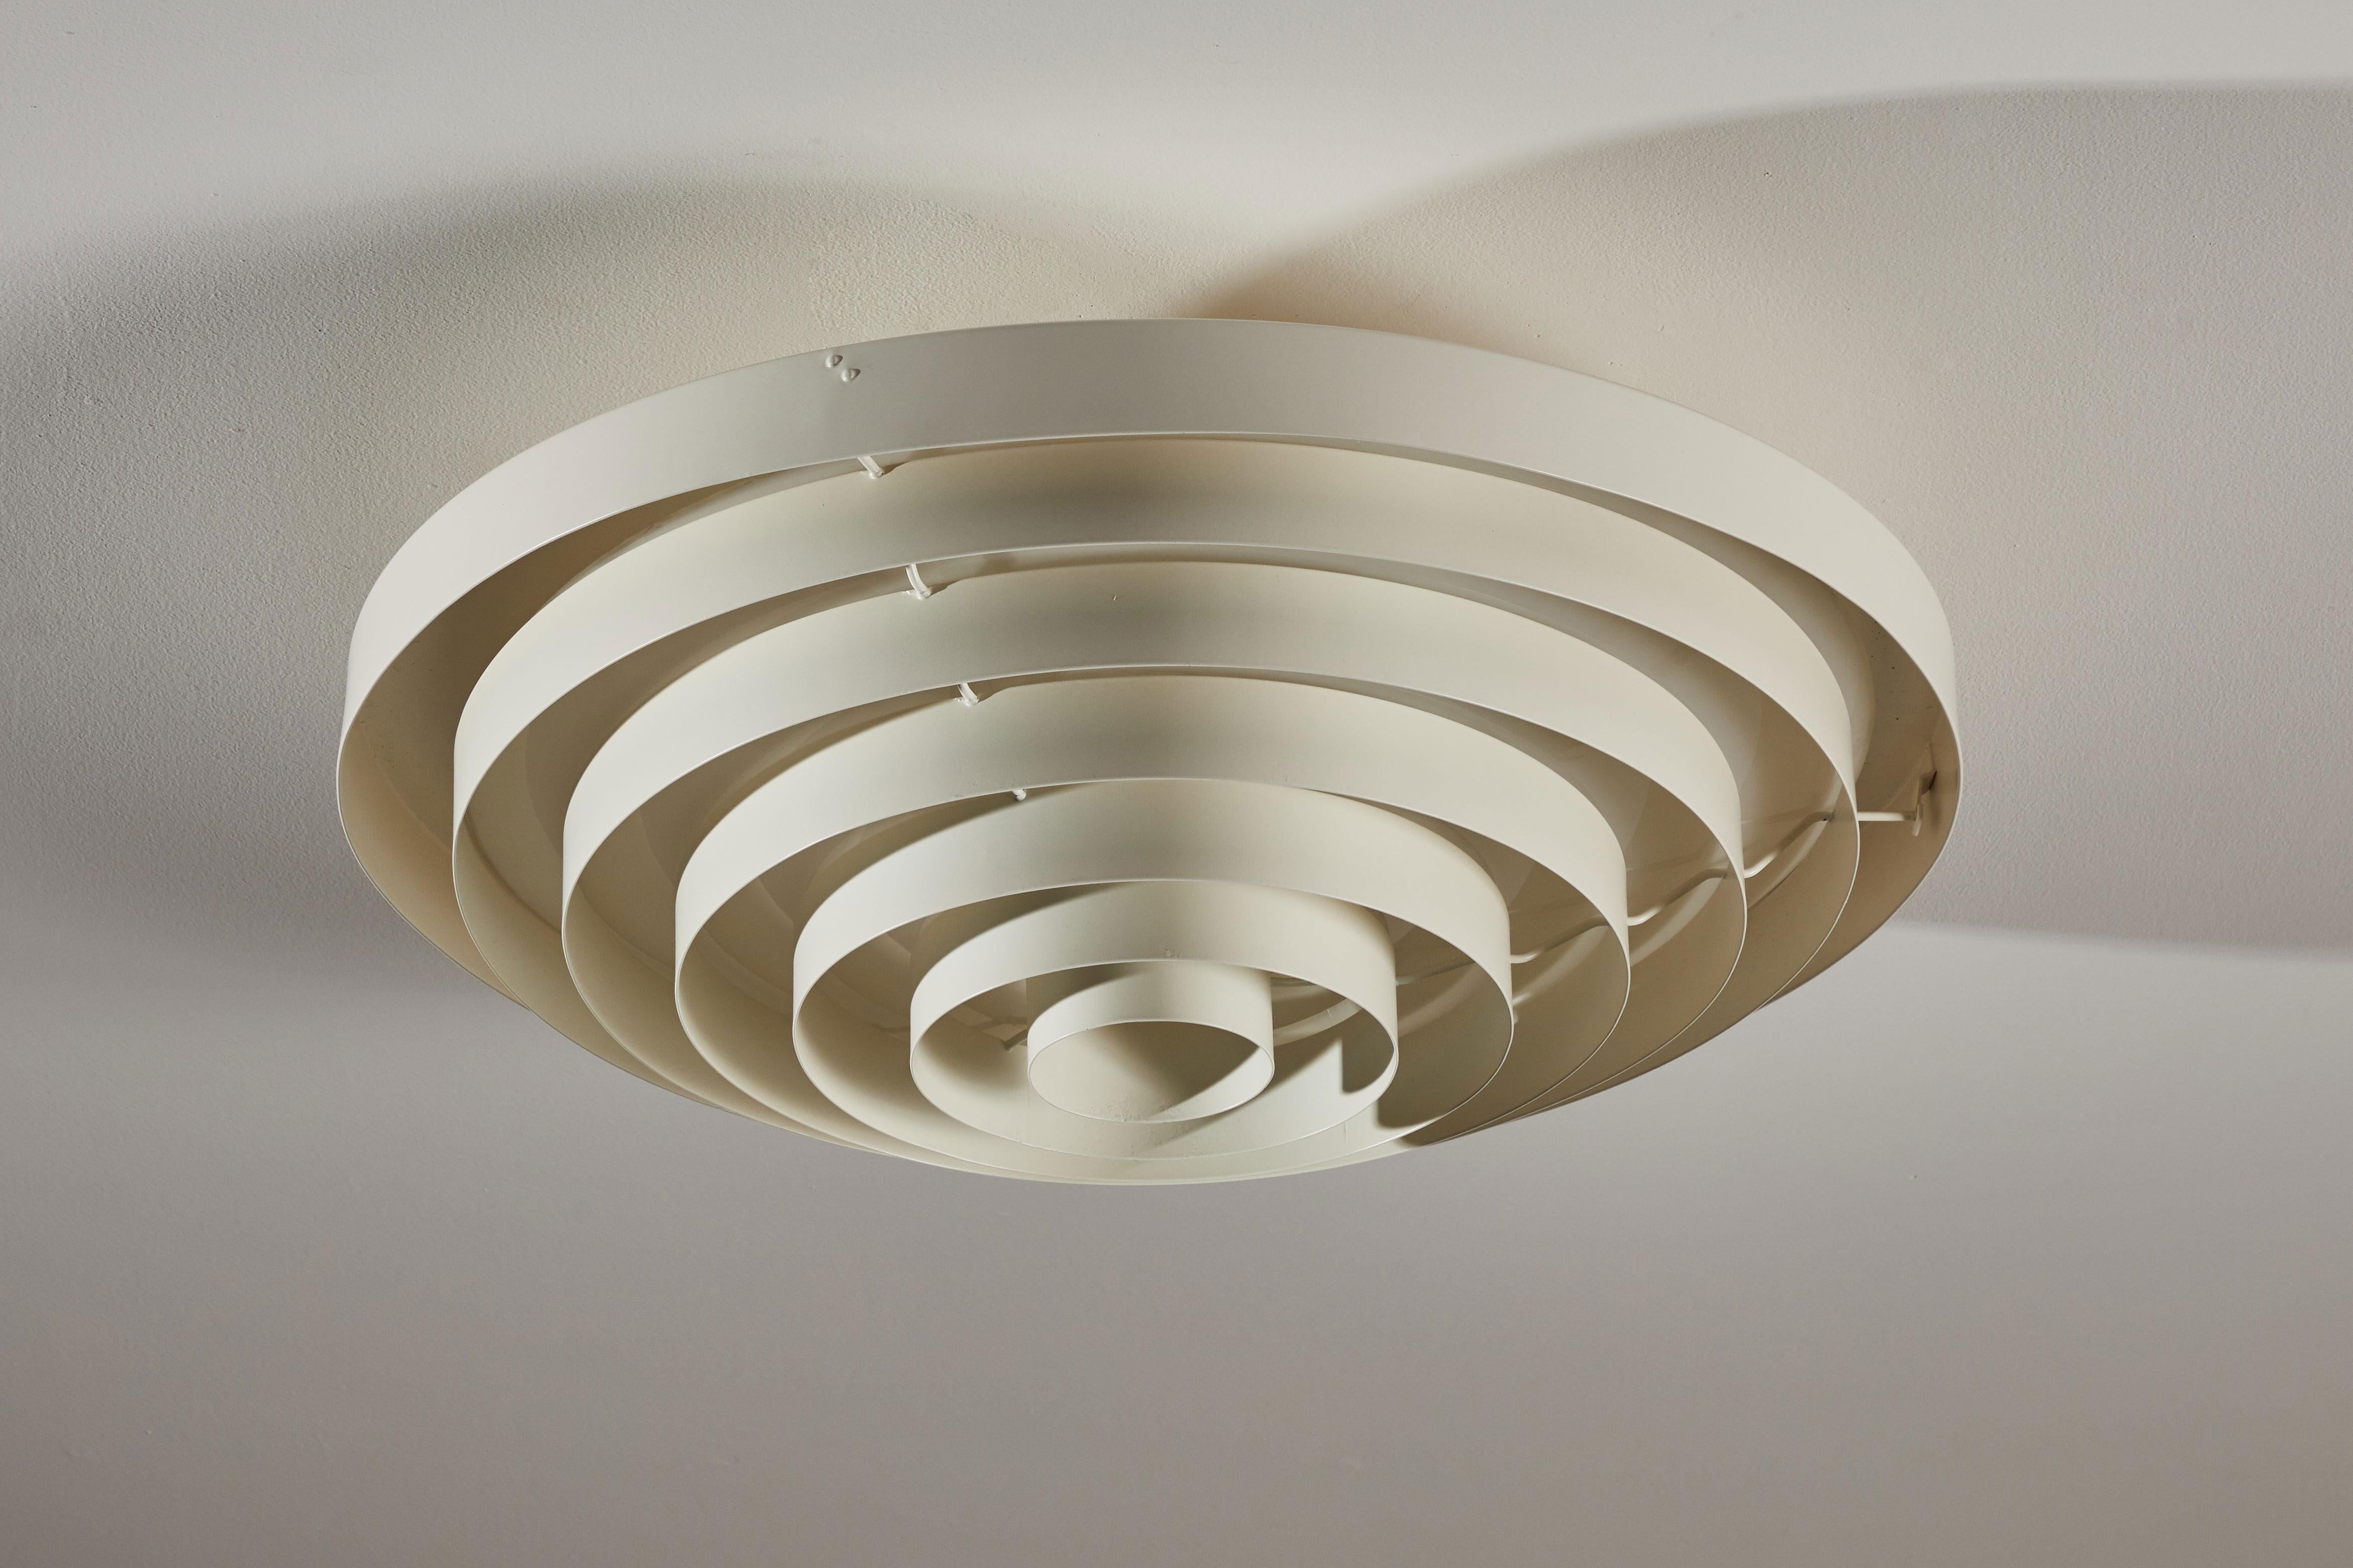 Two Flush Mount Ceiling Lights by Lisa Johansson-Pape for Orno 2